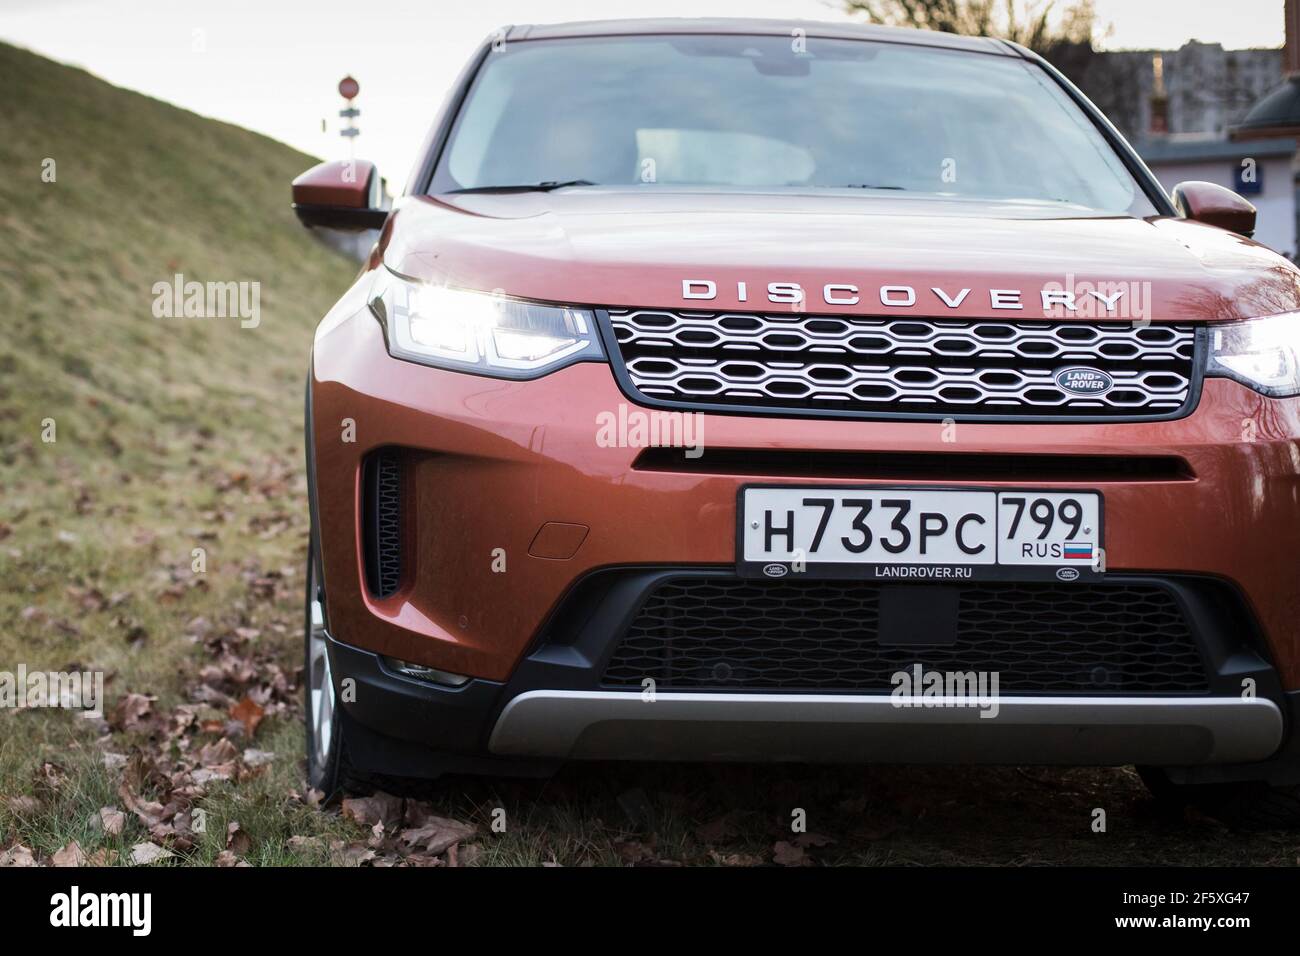 Moscow, Russia - December 20, 2019: Front side View of all new premium england suv. Land rover Discovery sport parked in the gray forest. Orange all wheel drive car standed on the ground. Stock Photo